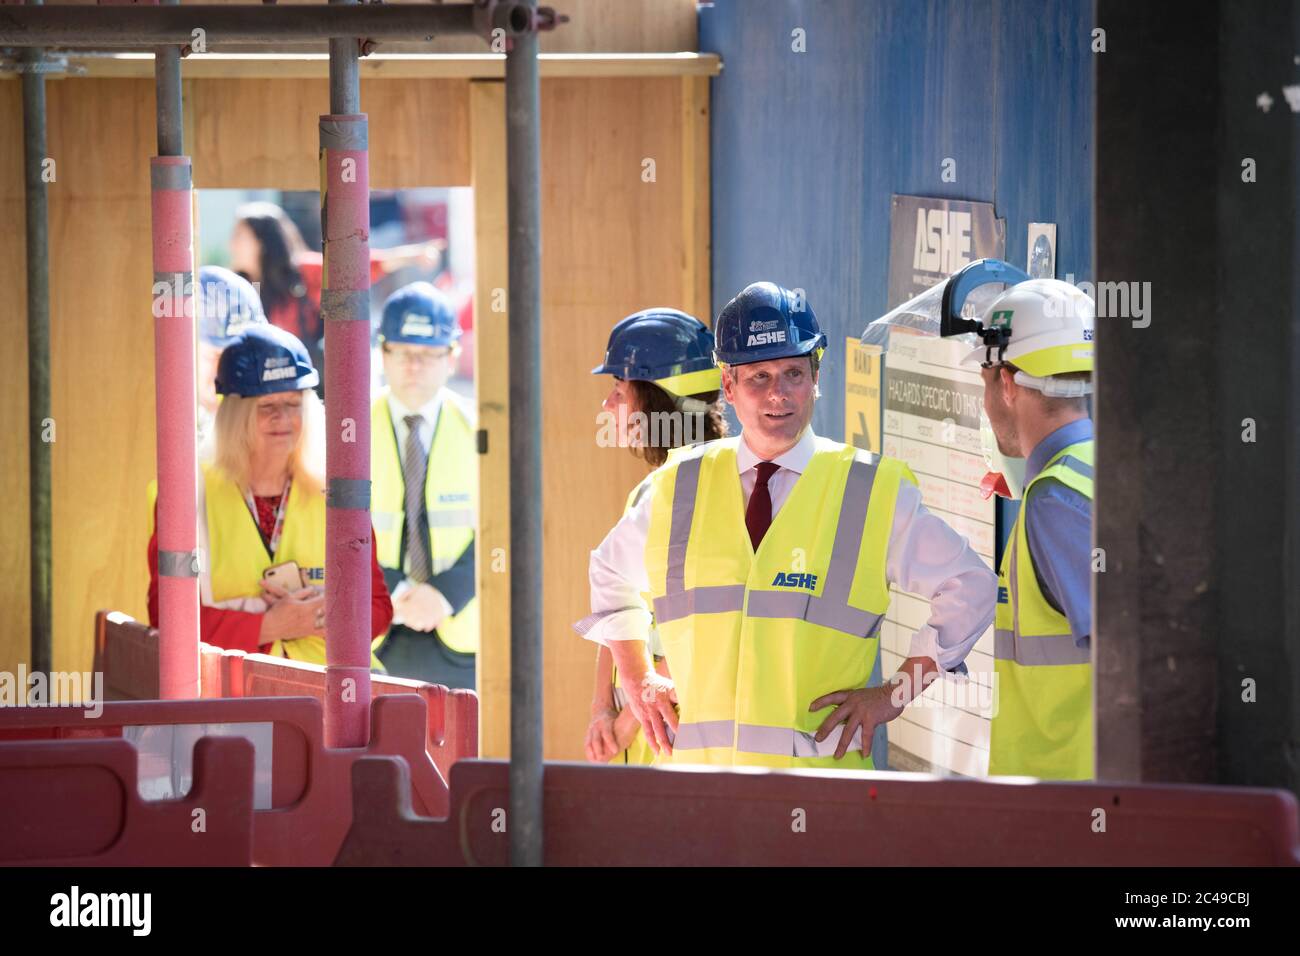 Labour Leader Keir Starmer during a visit to the town centre regeneration project in Stevenage, Hertfordshire, to discuss the economic recovery in the wake of COVID 19. Stock Photo